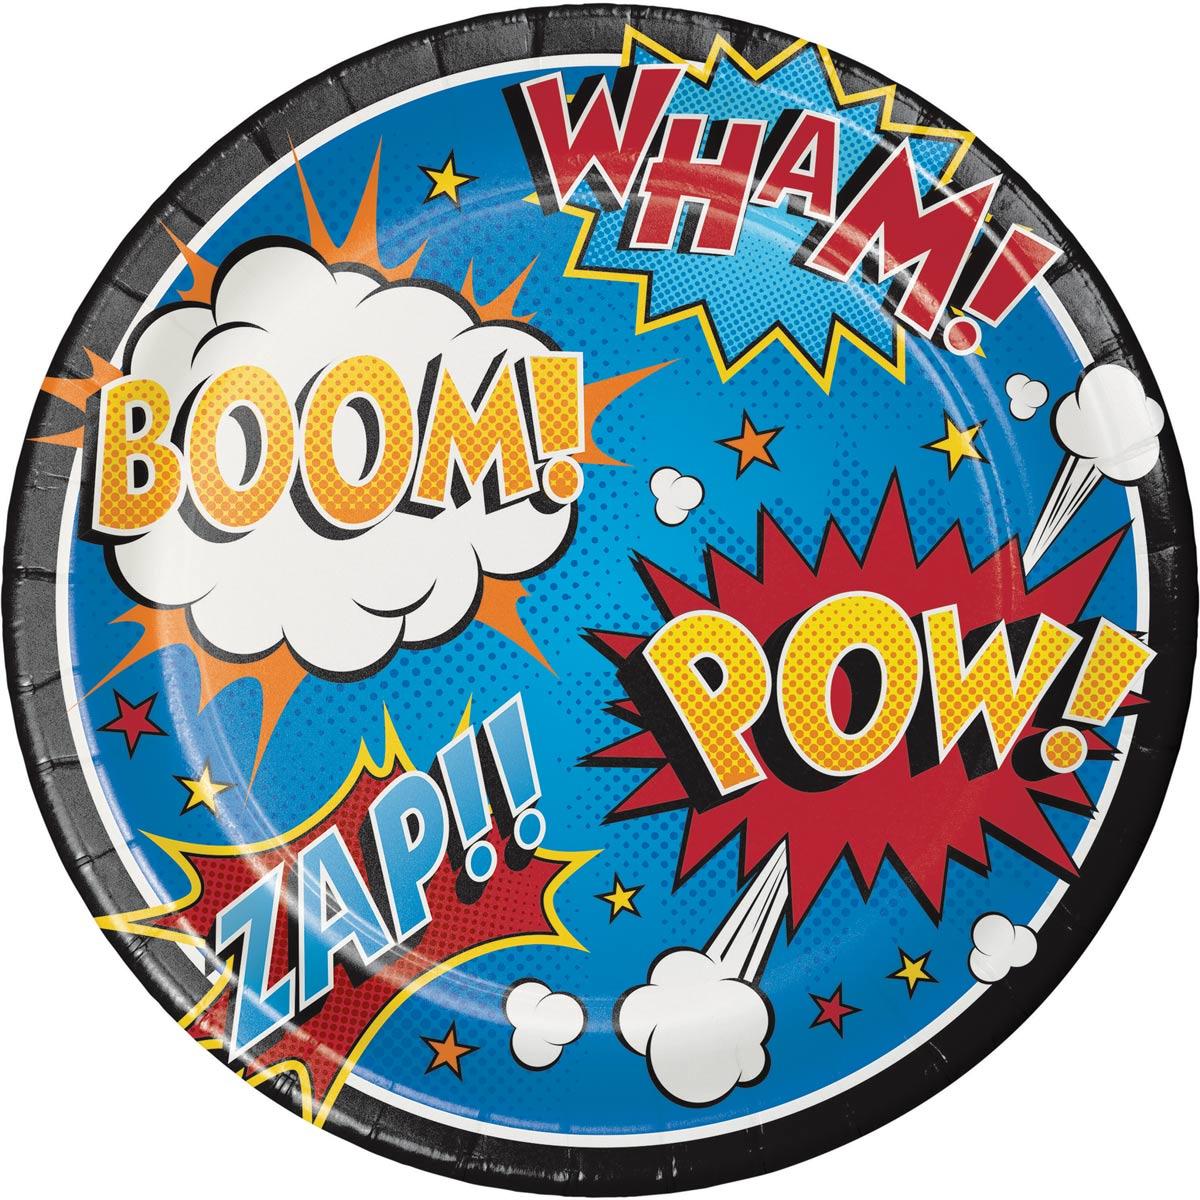 Pack of 8 Superhero Slogan Paper Plates by Creative Party 324838 available here at Karnival Costumes online party shop